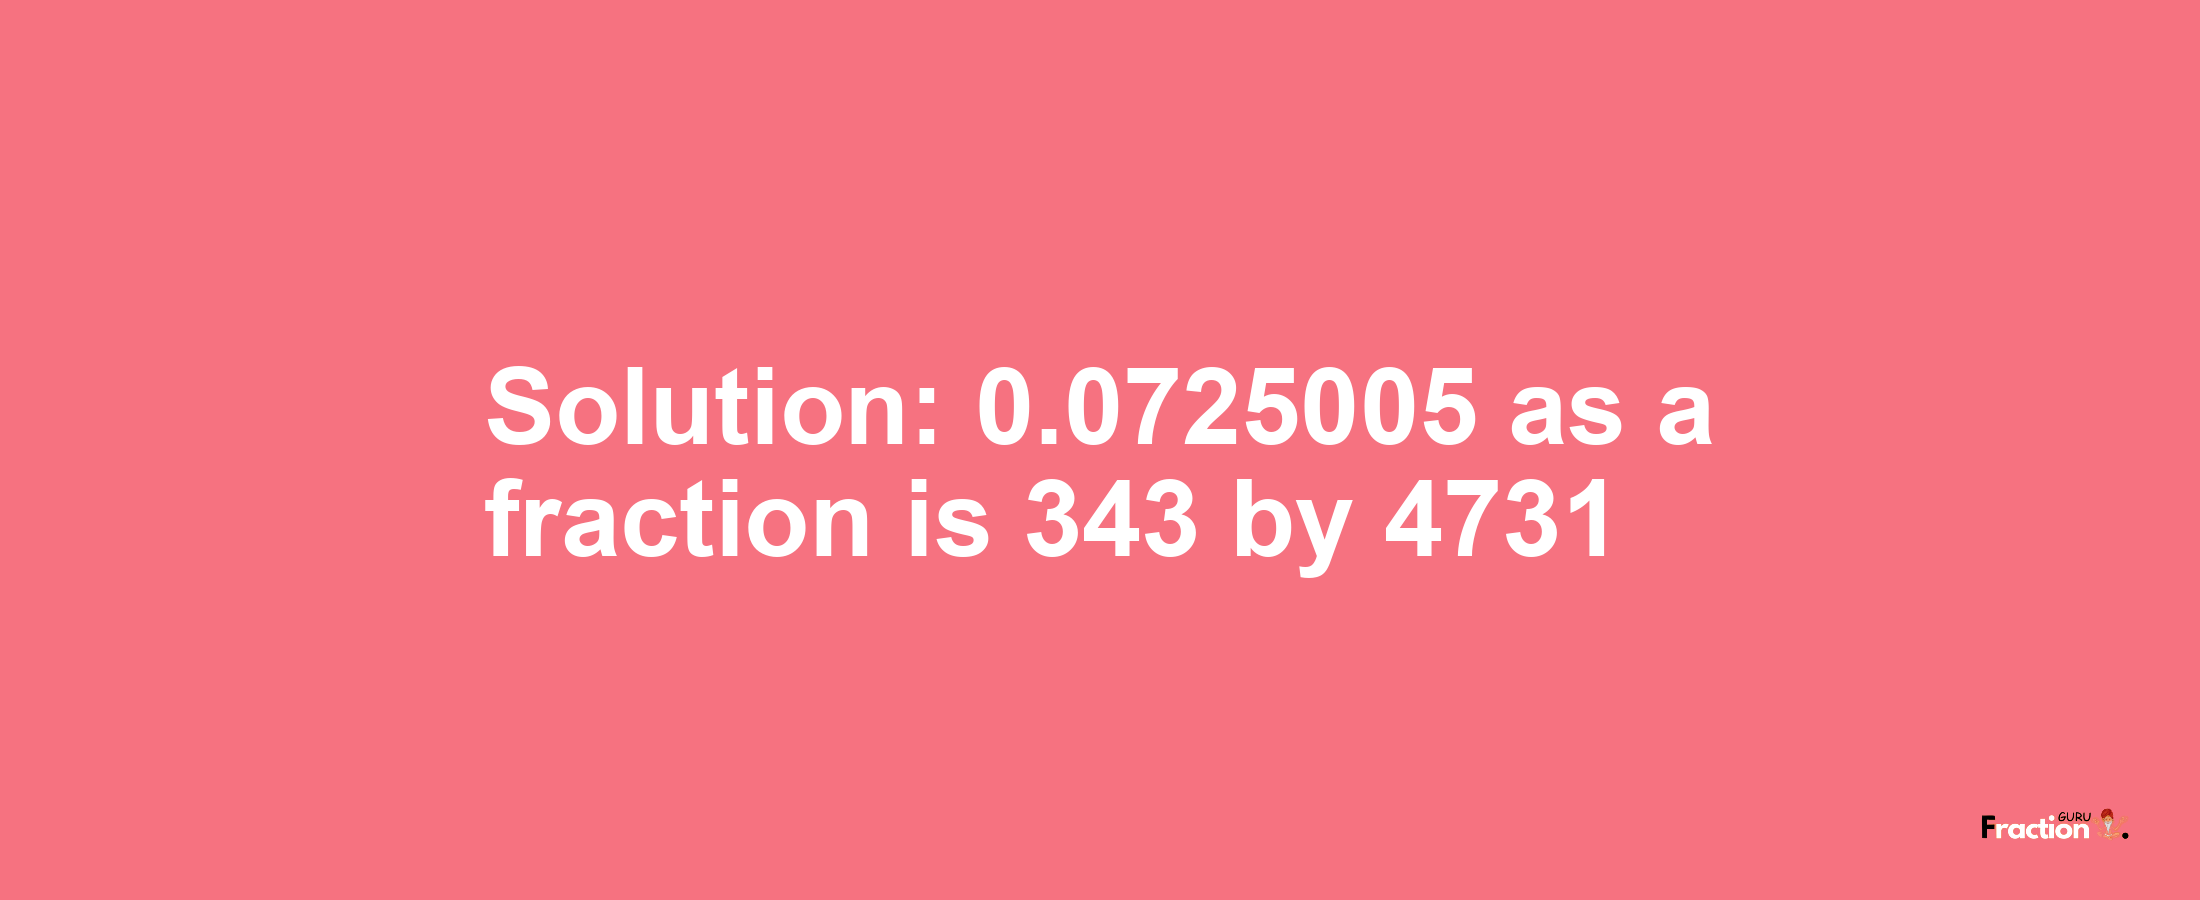 Solution:0.0725005 as a fraction is 343/4731